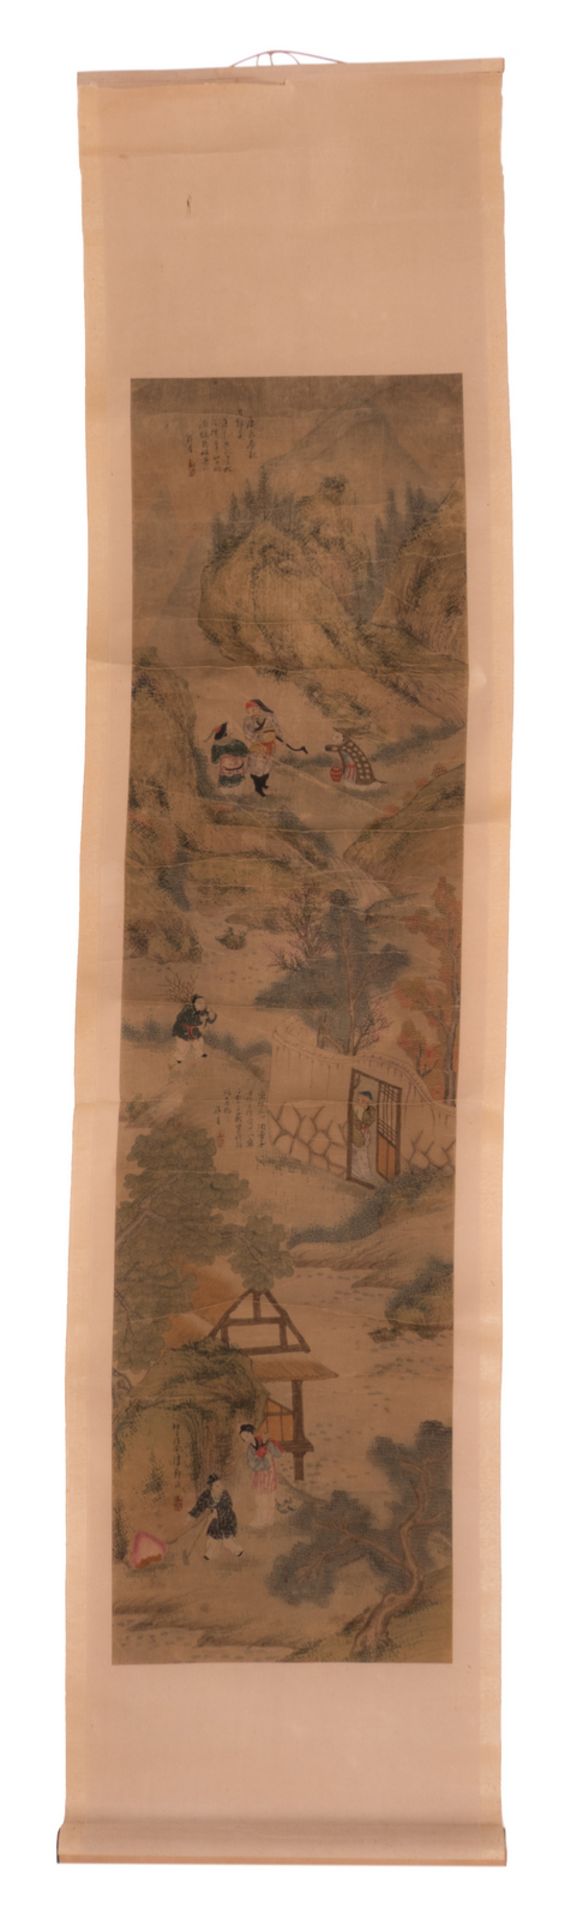 A Chinese scroll depicting animated scenes in a landscape, 19thC, 30,6 x 120 - 39,2 x 166 cm (with - Bild 2 aus 10